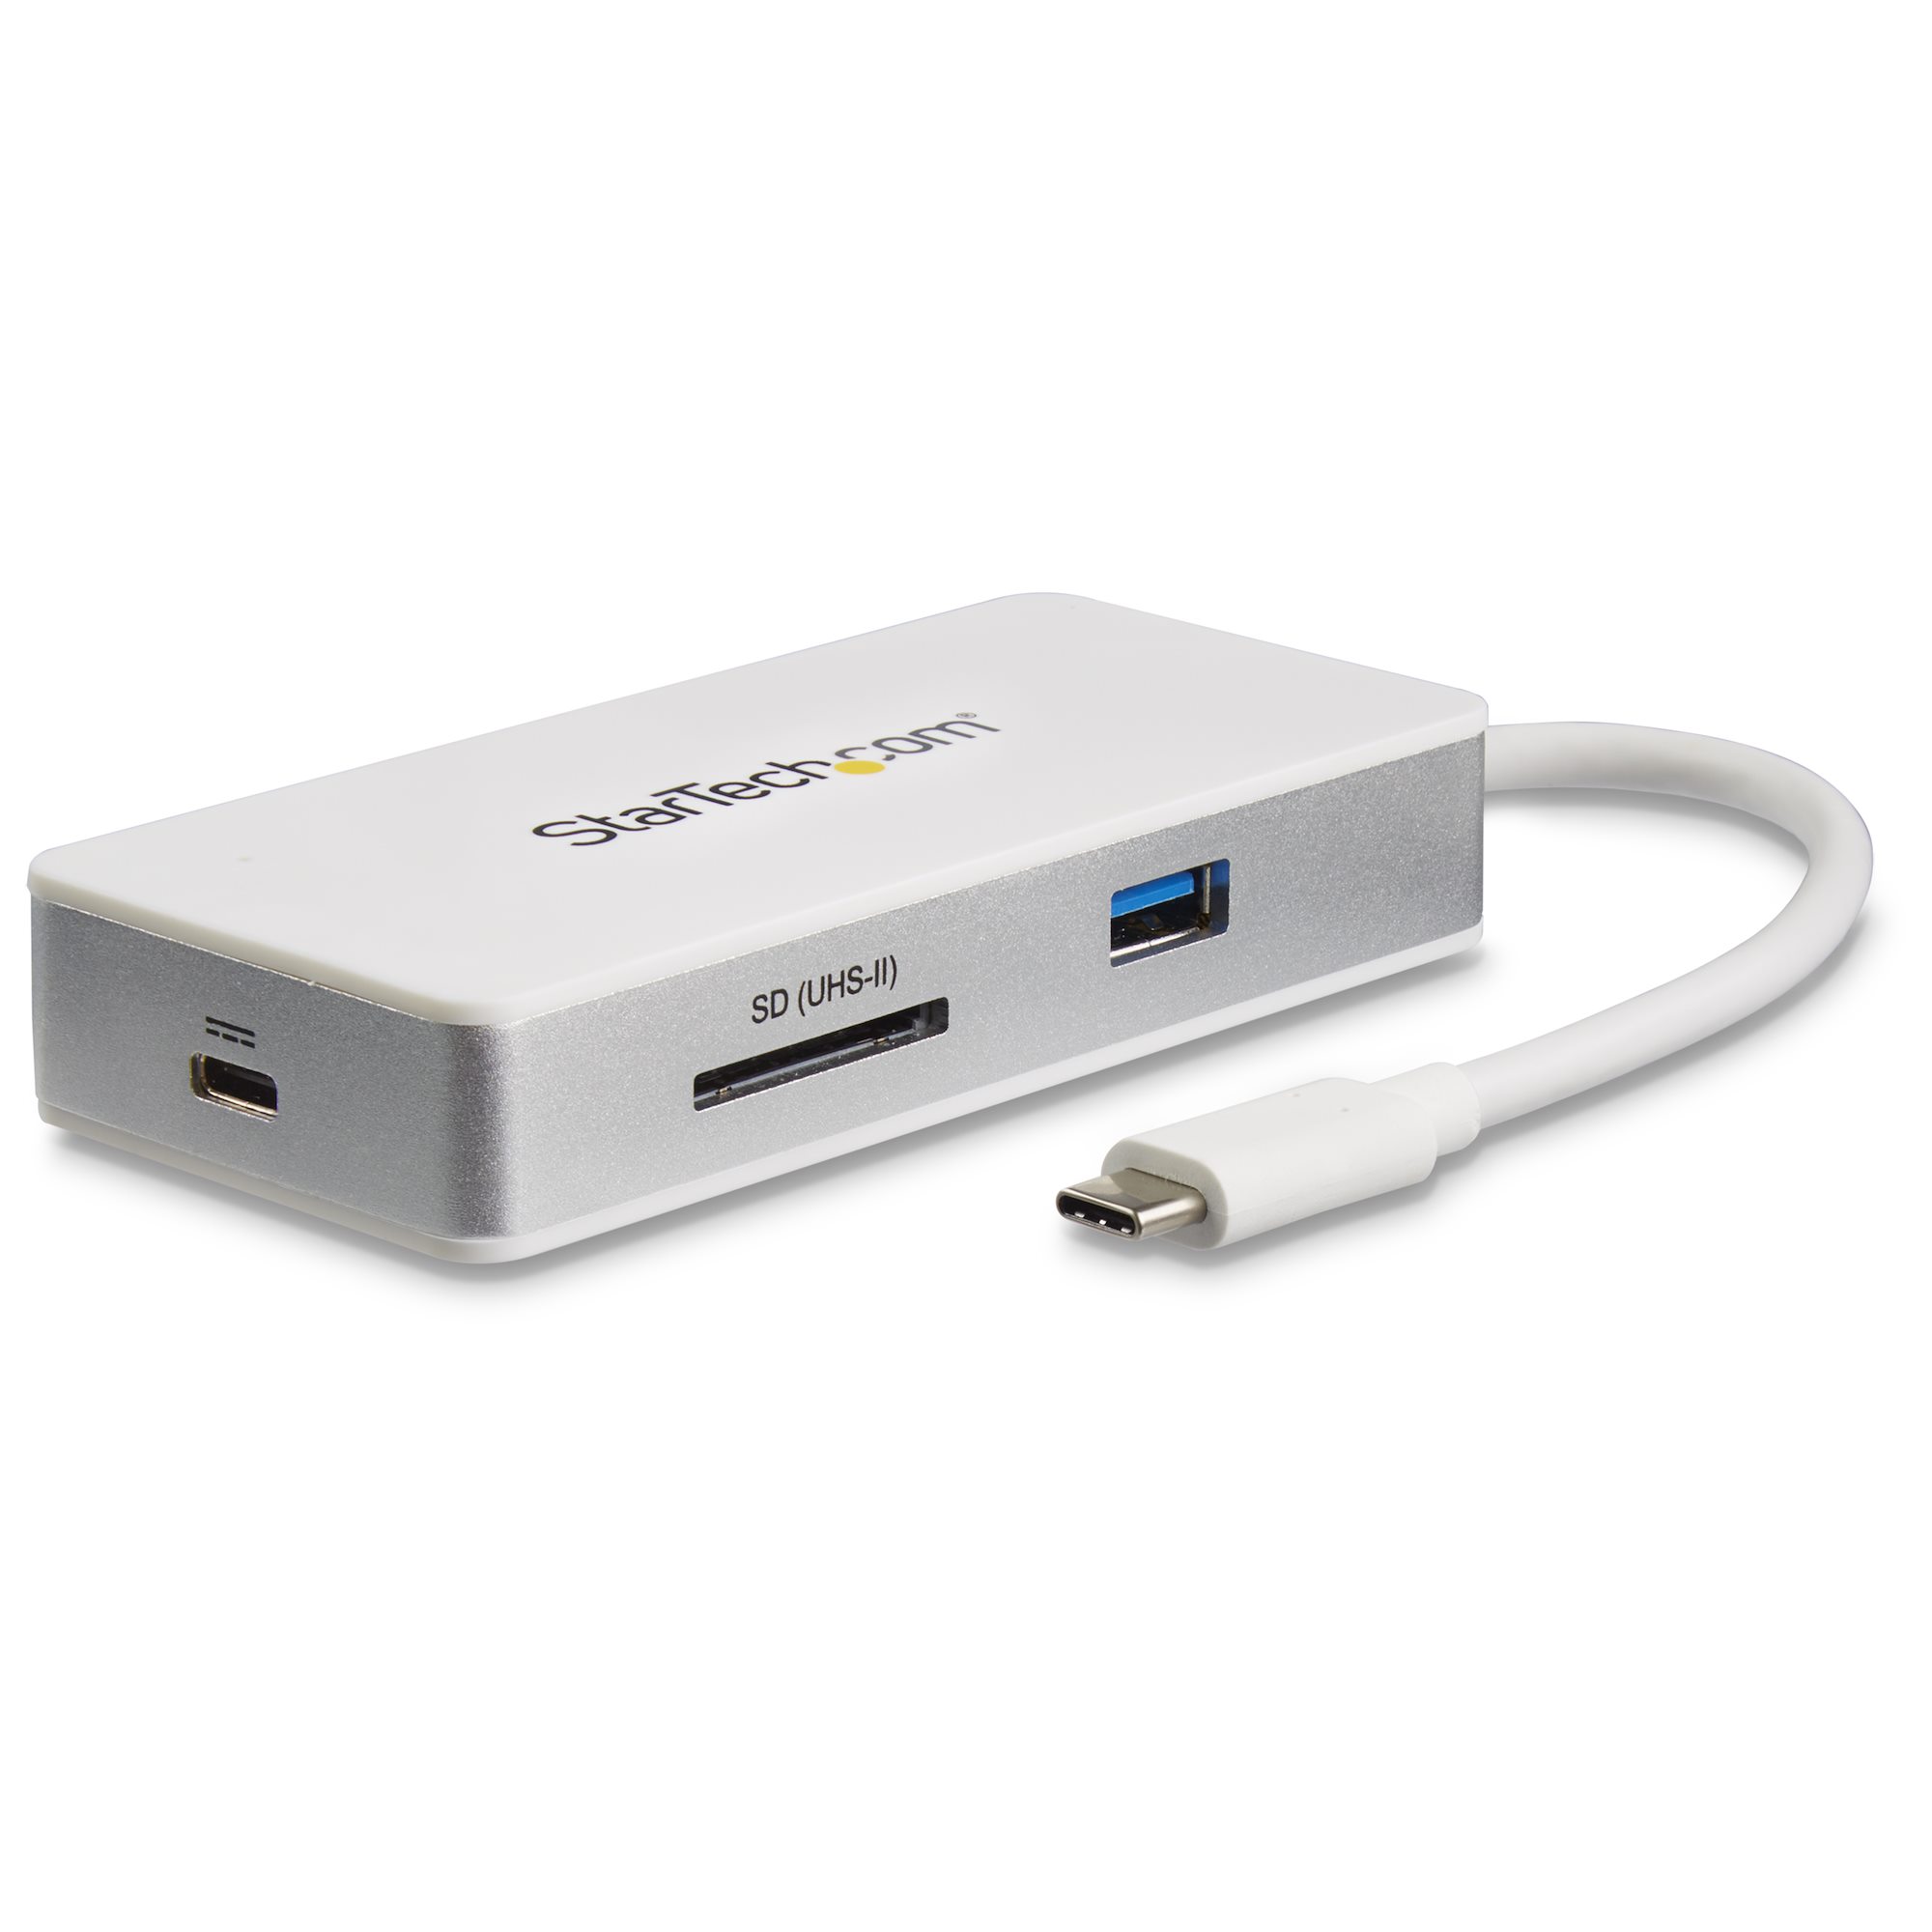 USB-C Multiport Adapter - SD (UHS-II) Card Reader - 100W Power Delivery -  4K HDMI - GbE - 1x USB 3.0